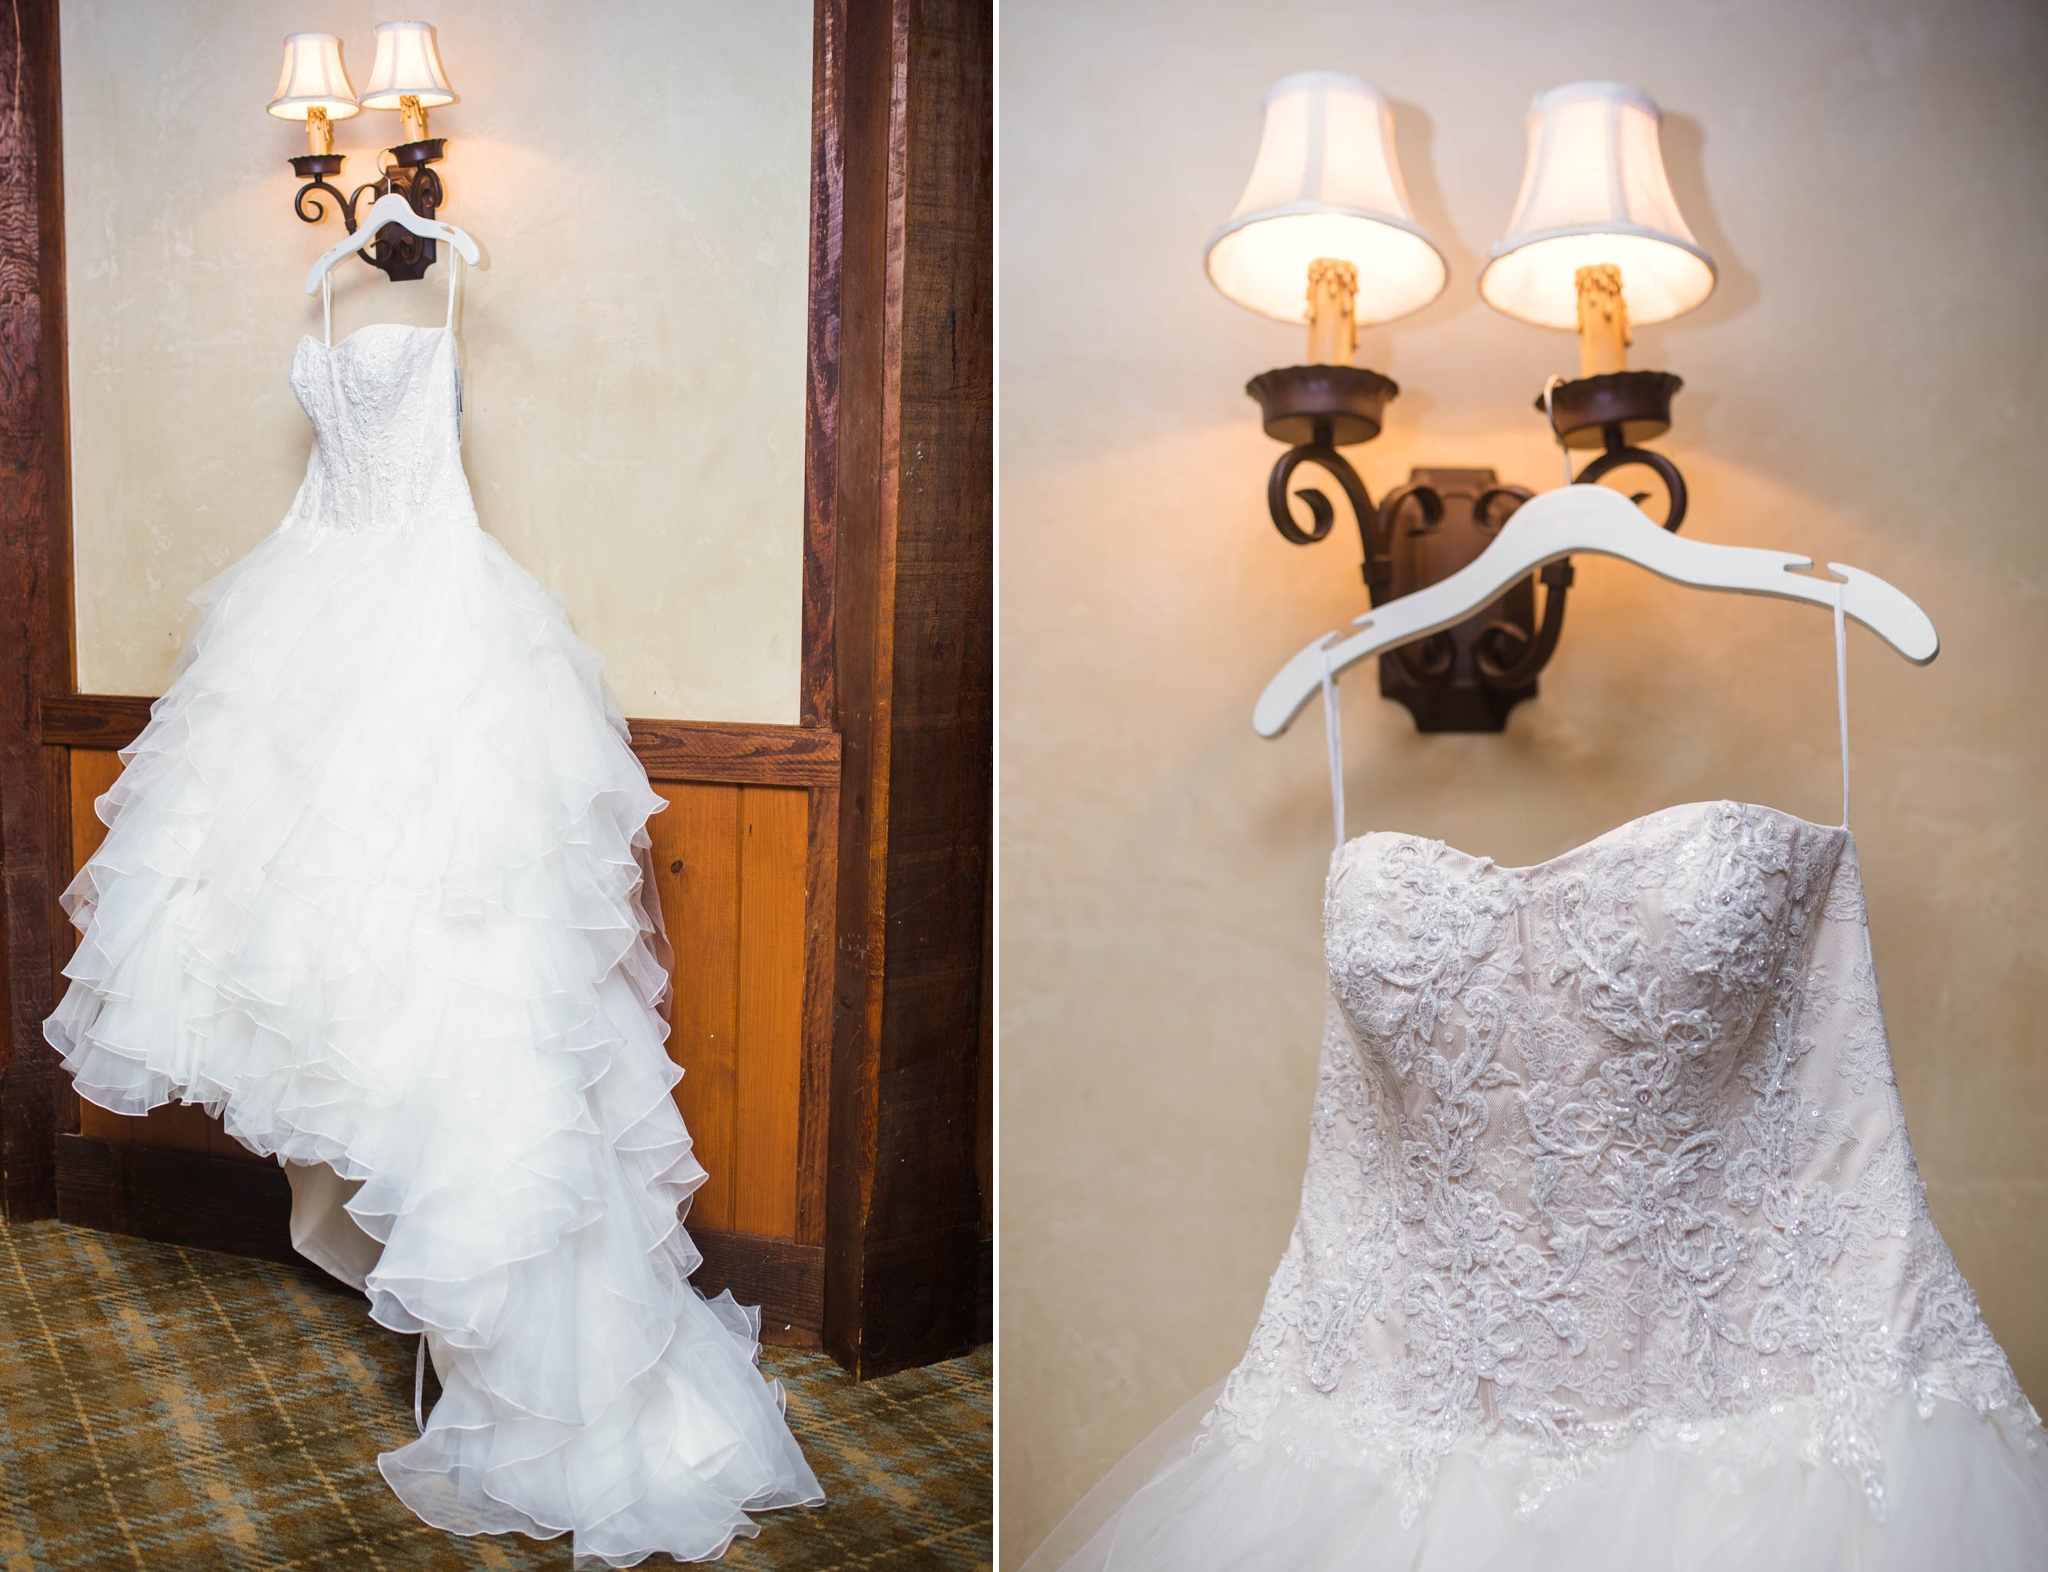 Ball Gown Wedding Dress - Dona + Doug - MacGregor Downs Country Club in Cary, NC - Raleigh Wedding Photographer